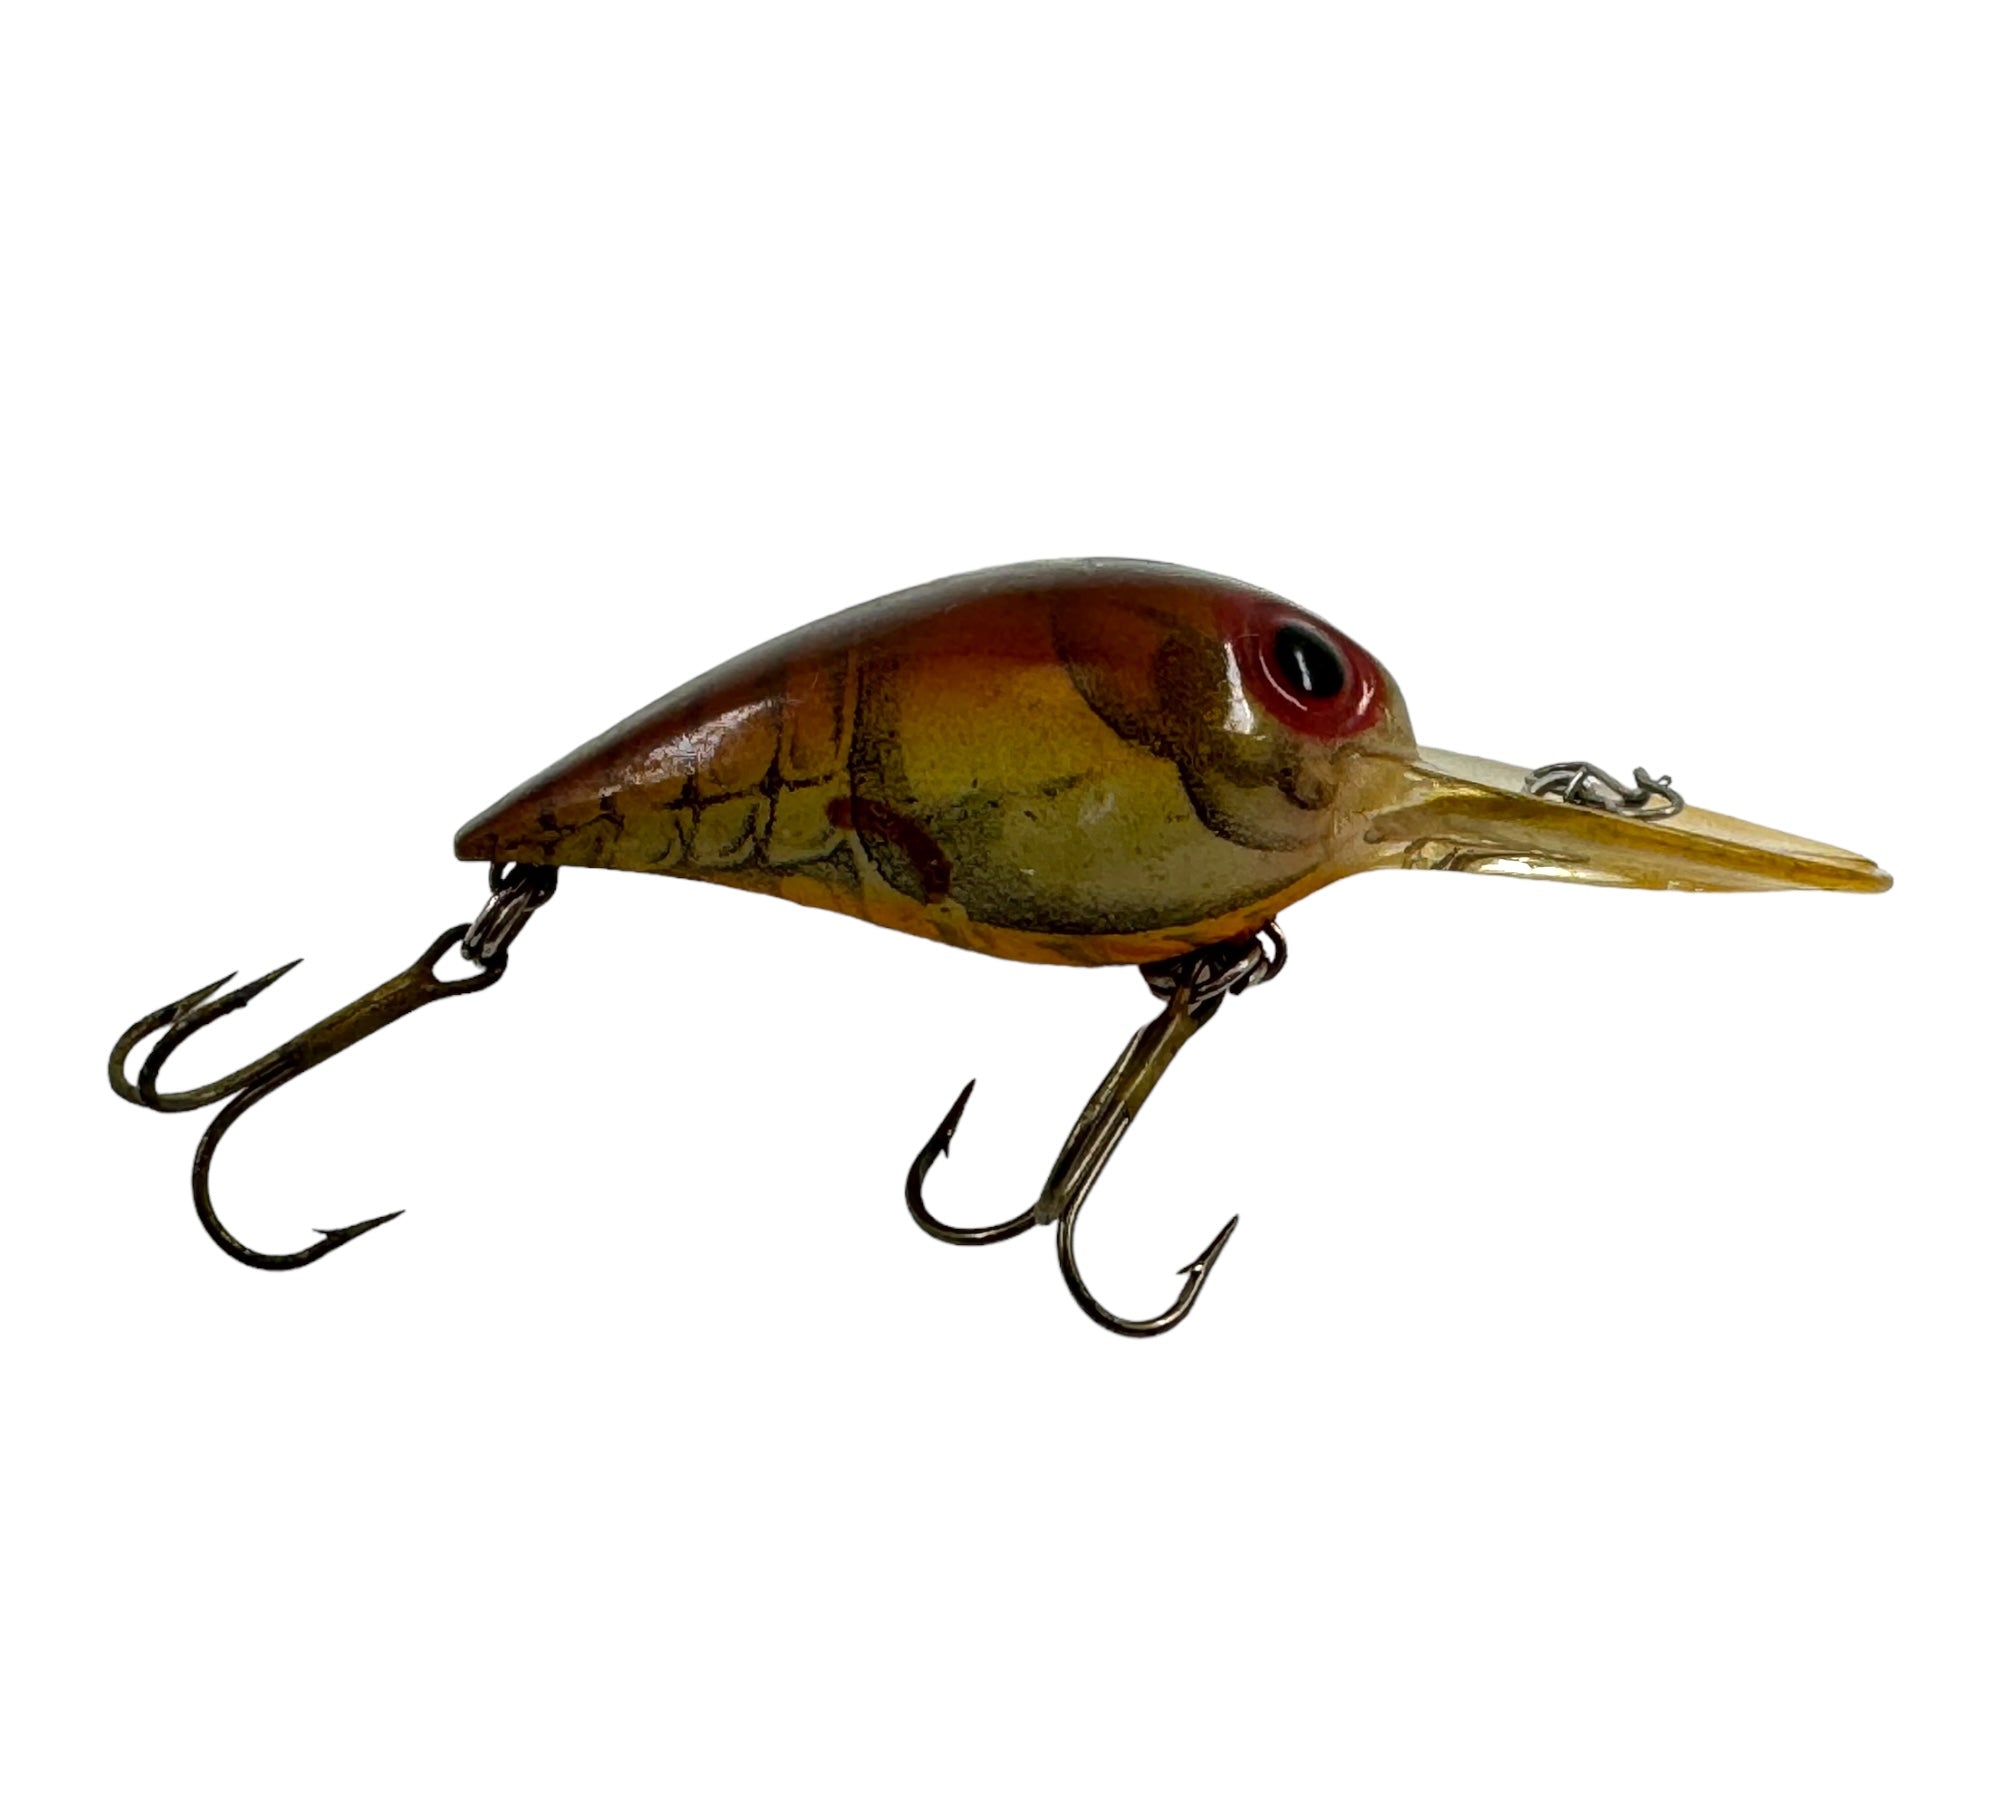 STORM LURES WIGGLE WART Fishing Lure • V-62 BROWN CRAYFISH – Toad